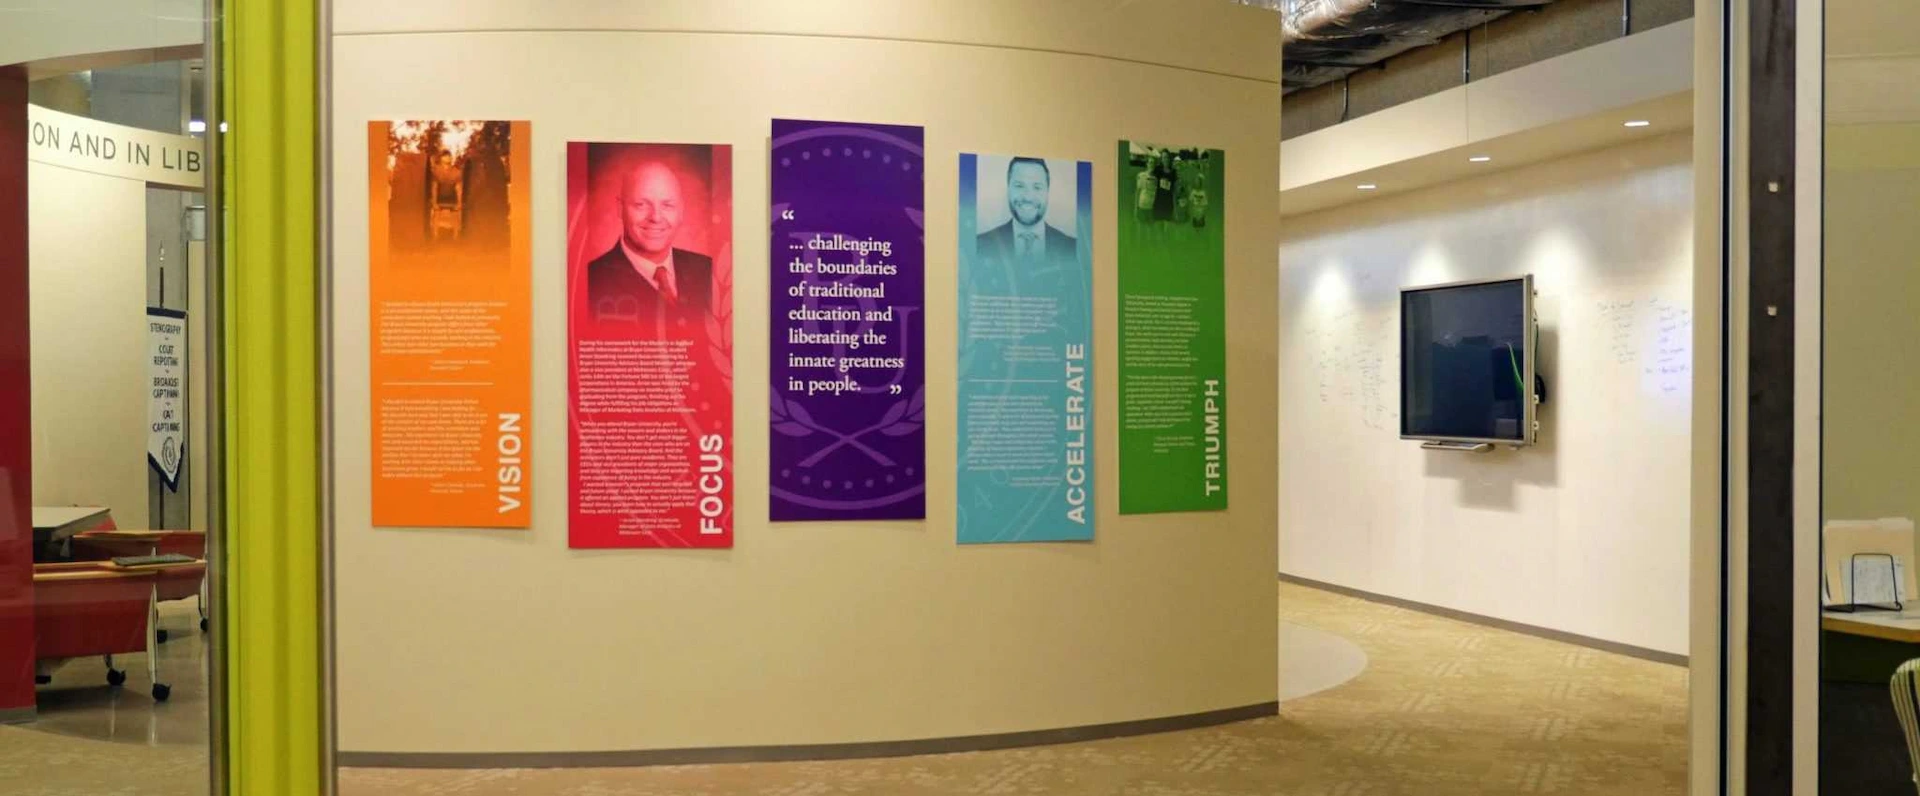 BU campus interior wall with posters